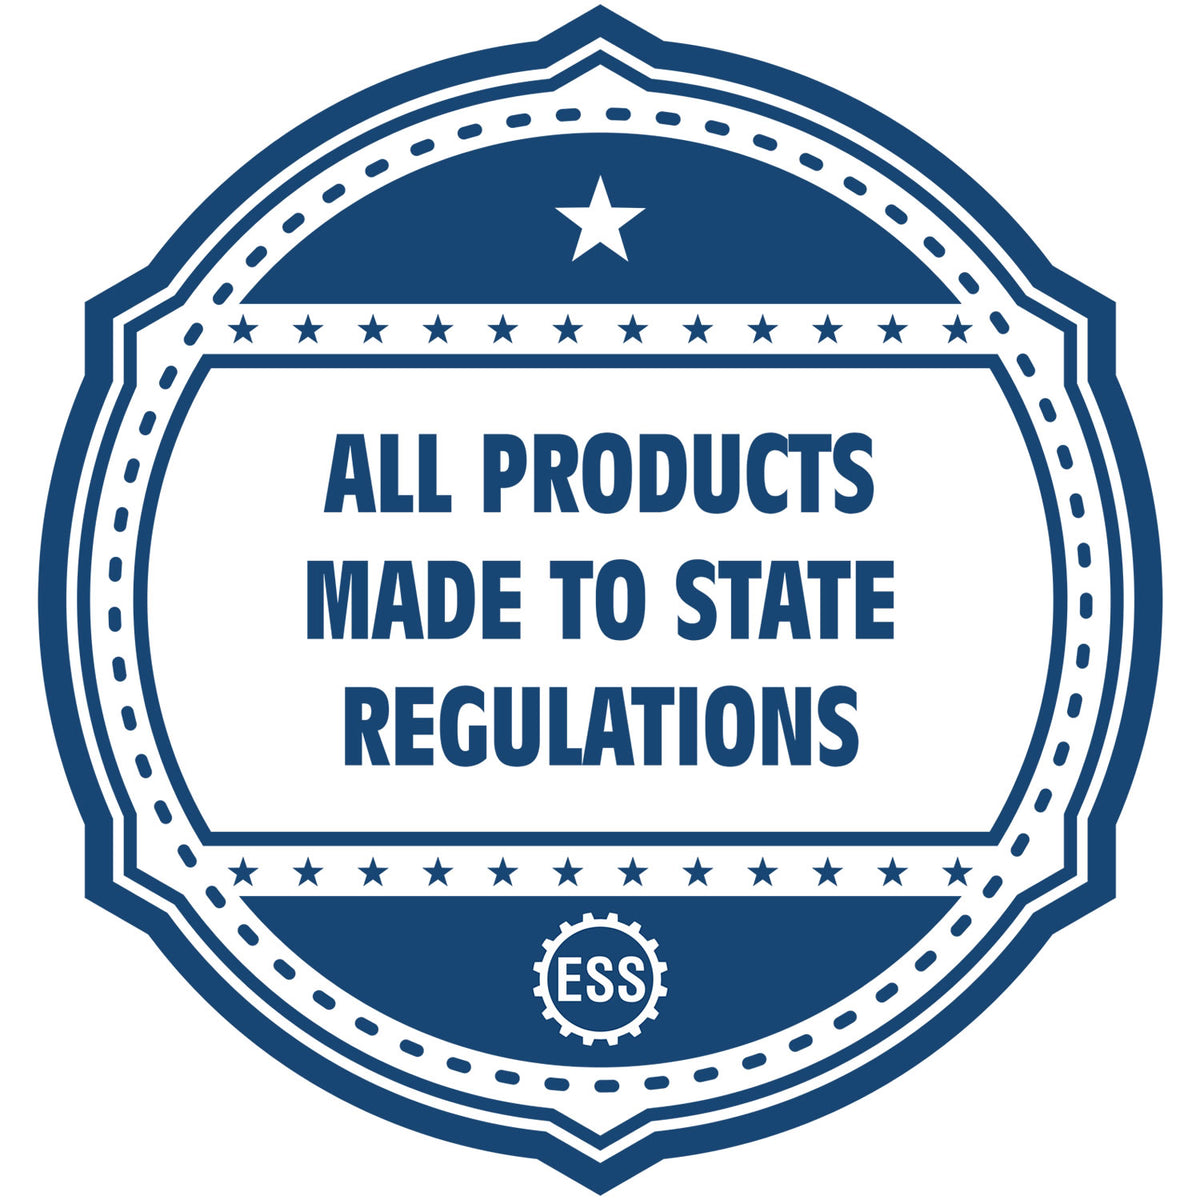 An icon or badge element for the District of Columbia Desk Architect Embossing Seal showing that this product is made in compliance with state regulations.